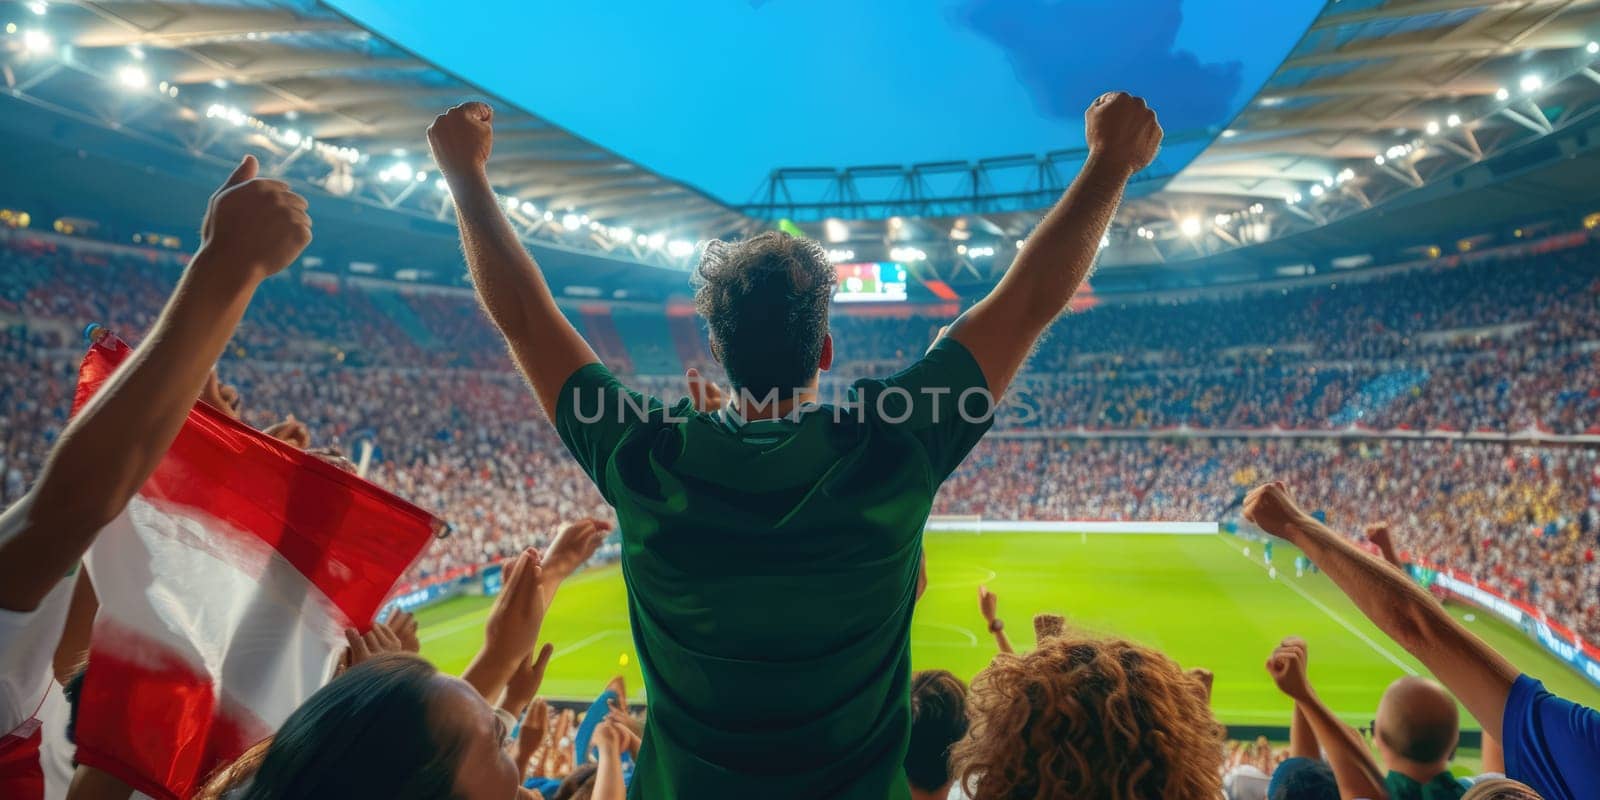 A man is watching a soccer game in a stadium with his arms in the air AIG41 by biancoblue